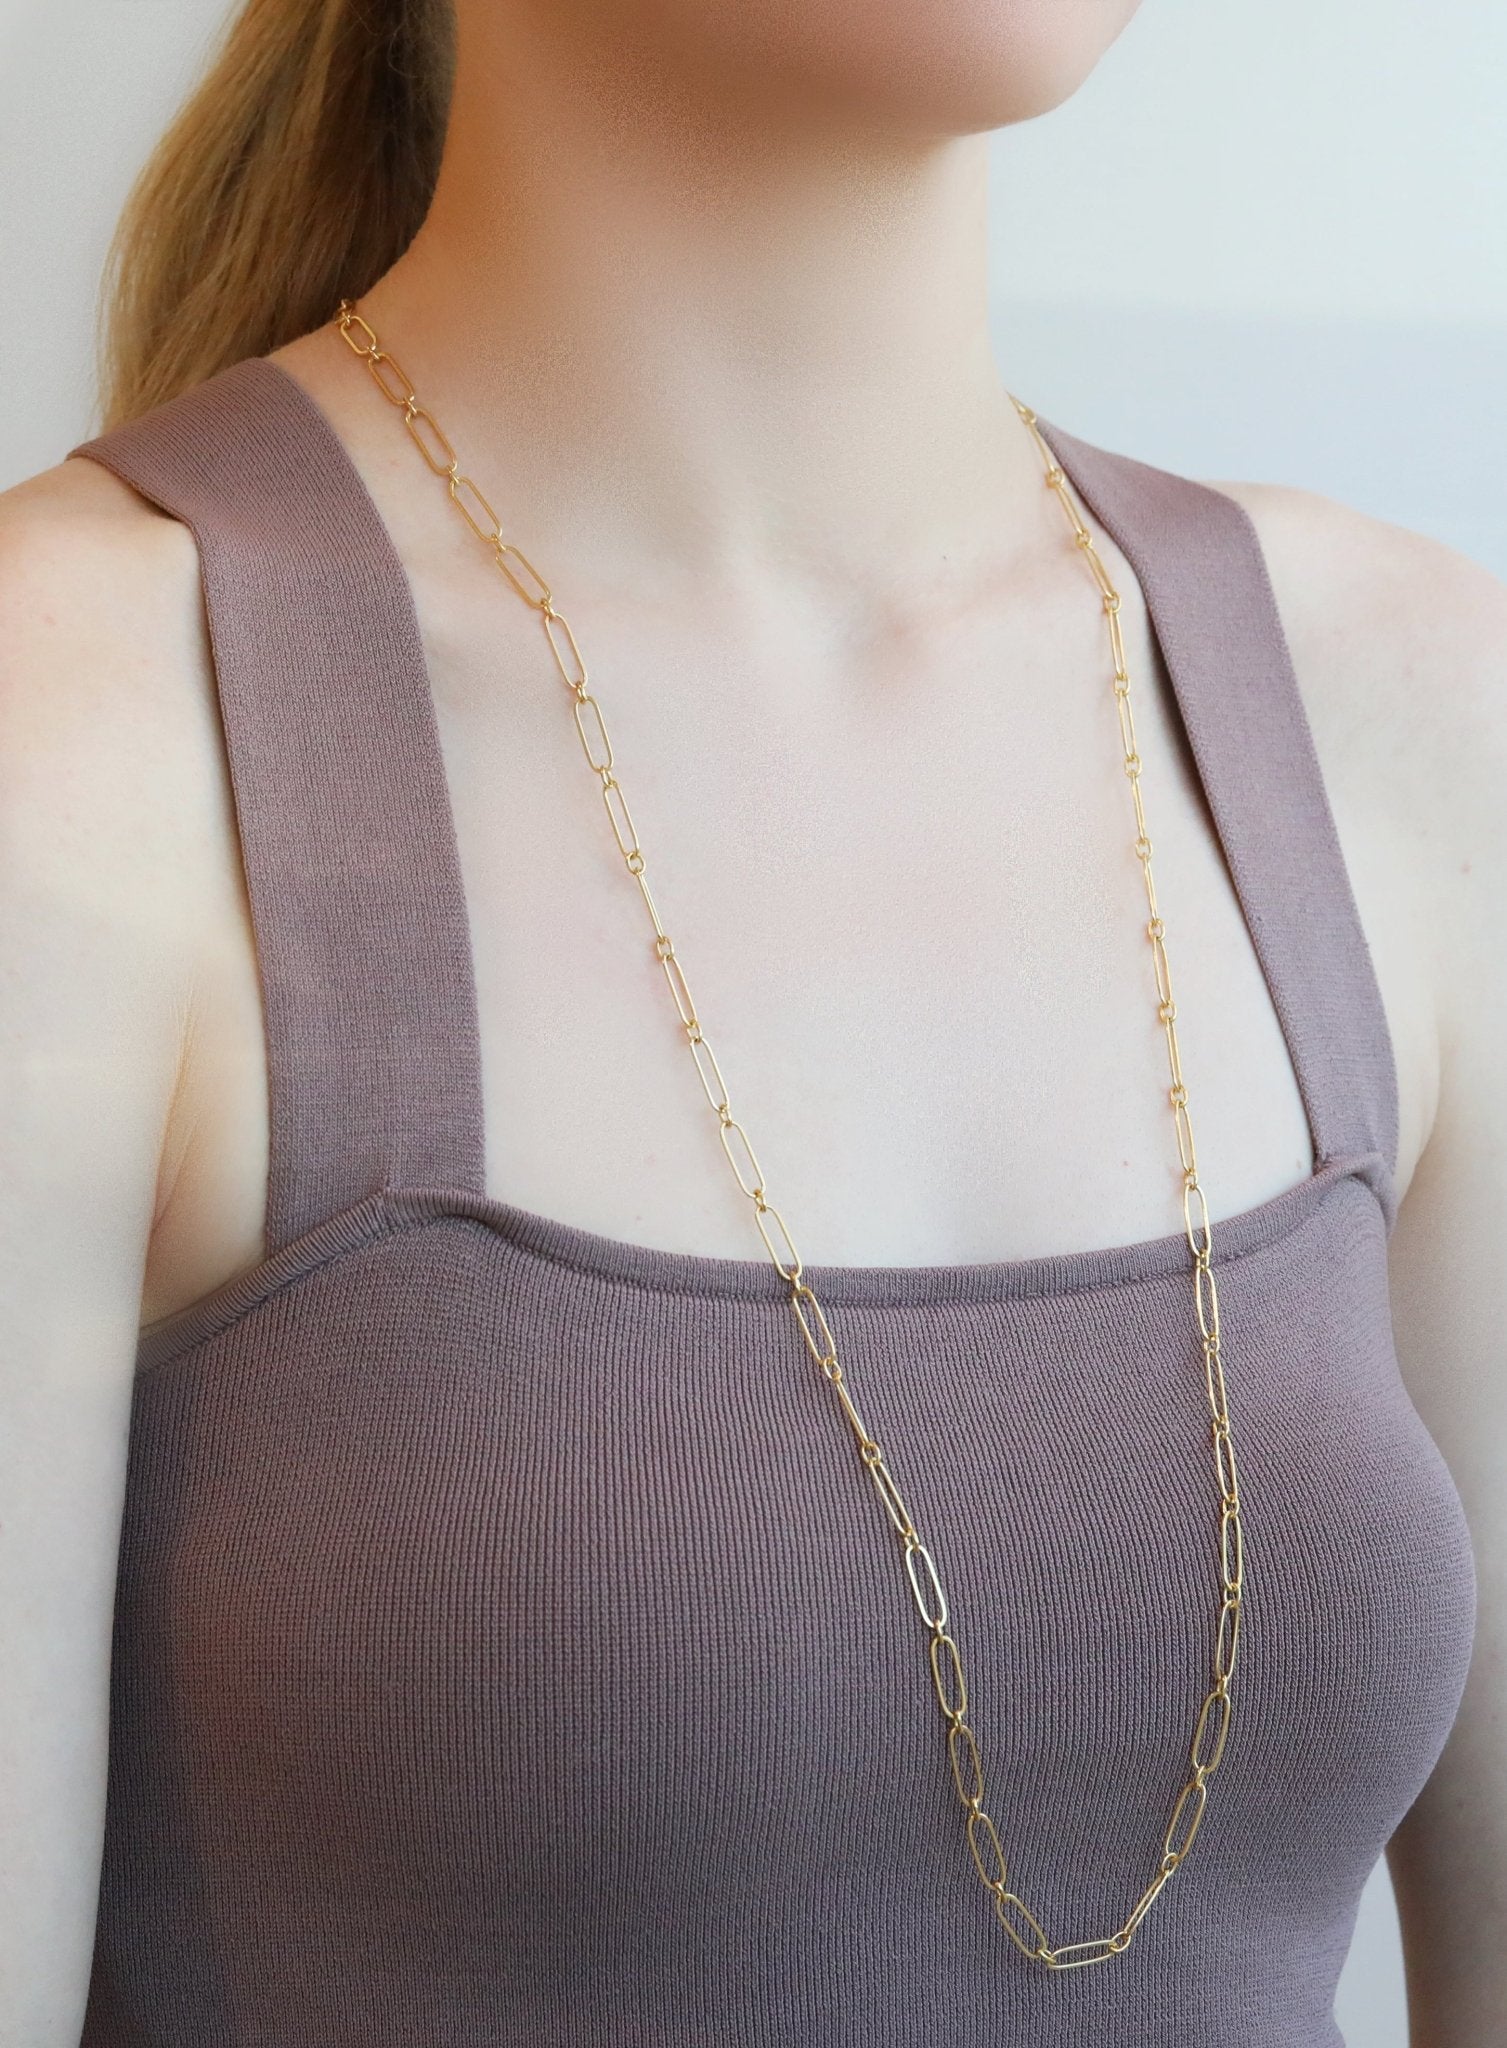 20K Gold Handmade &quot;Flattened Paperclip Link&quot; Necklace